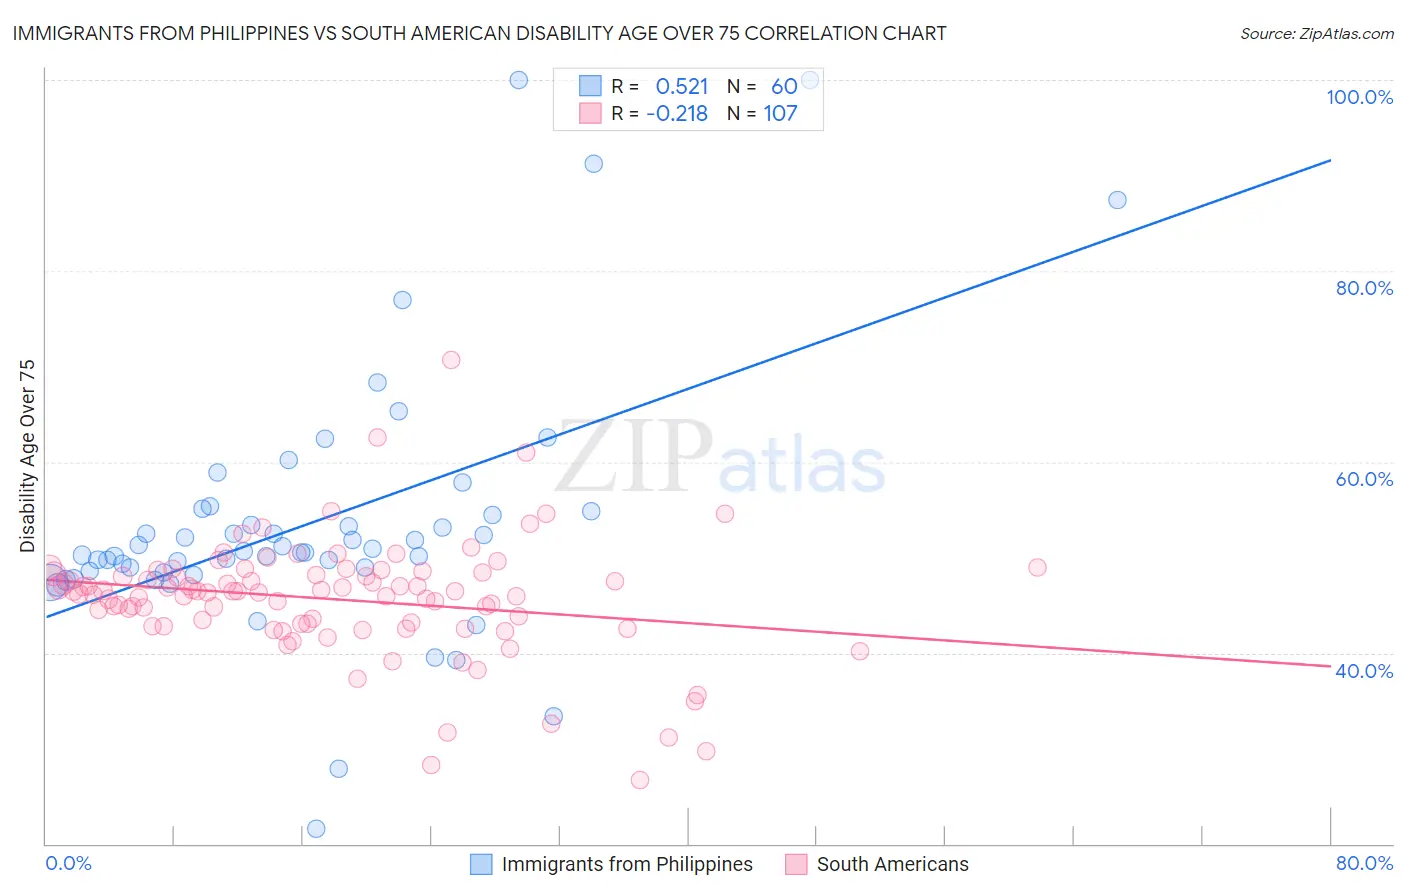 Immigrants from Philippines vs South American Disability Age Over 75